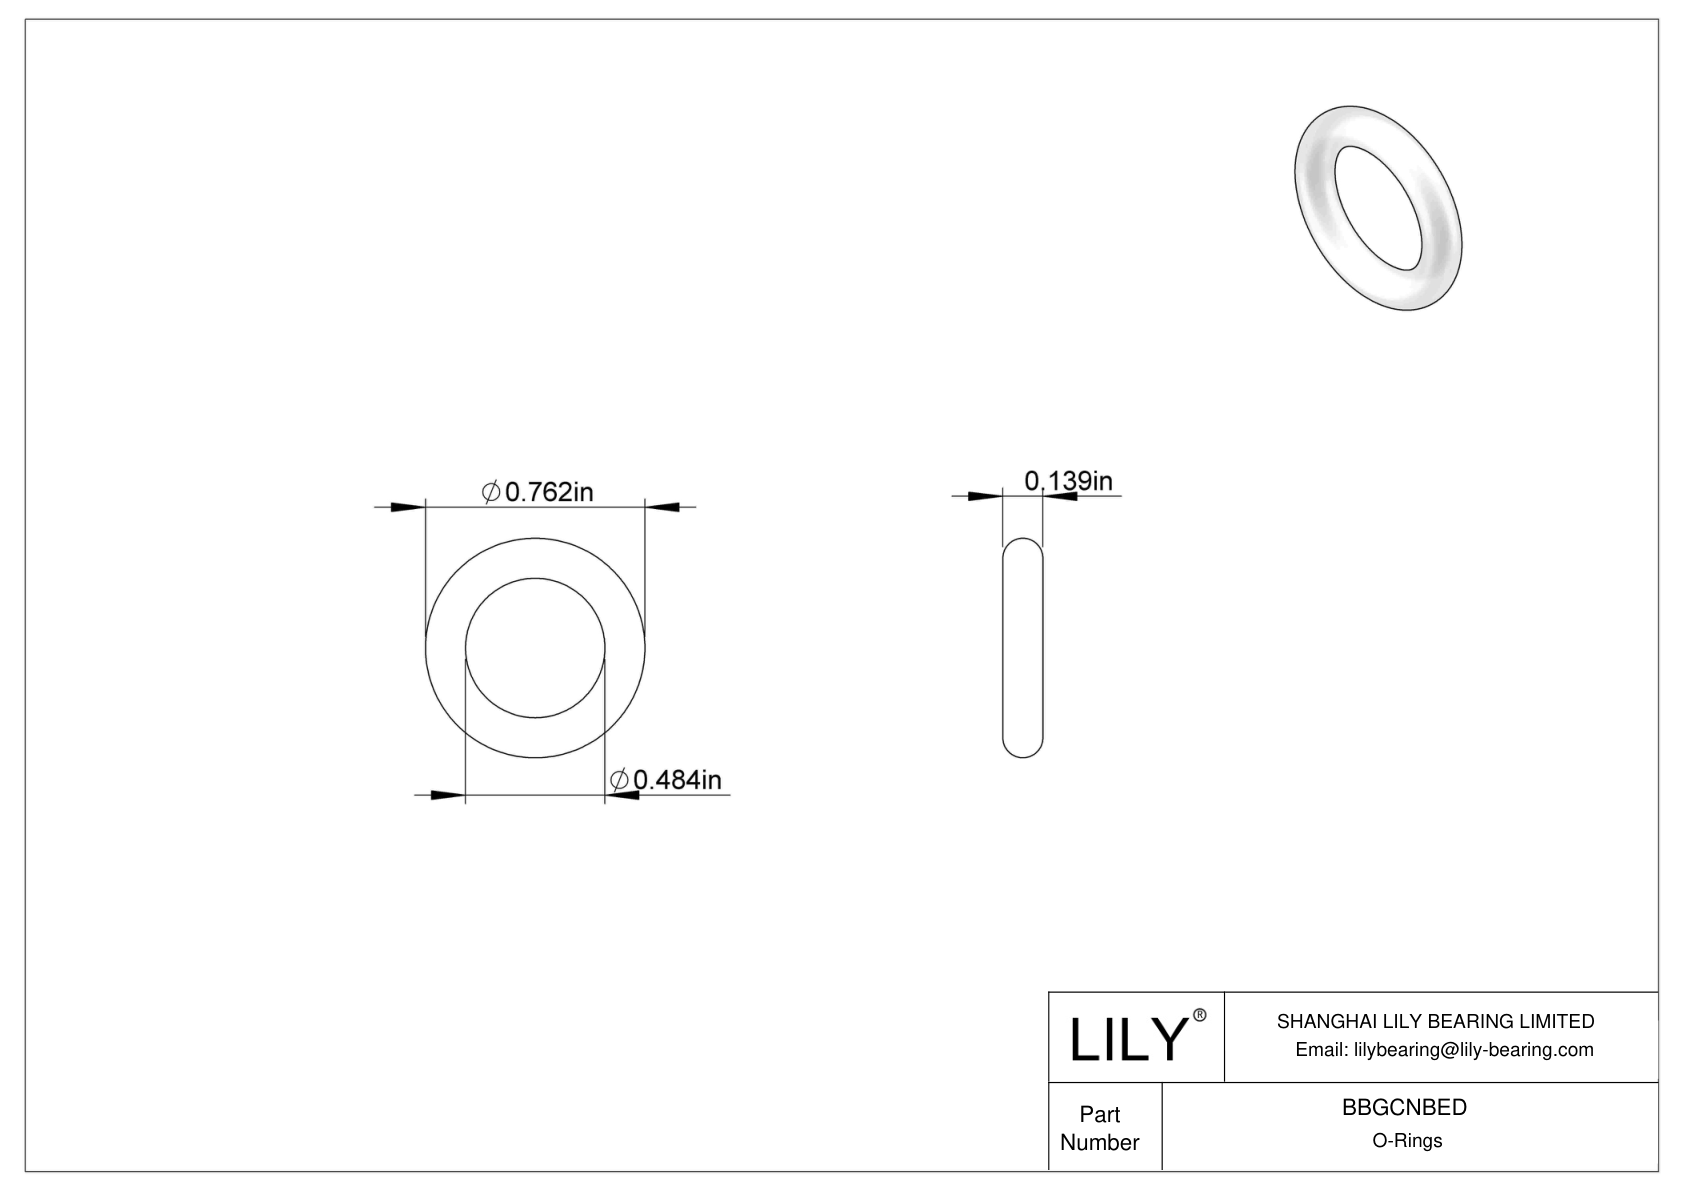 BBGCNBED High Temperature O-Rings Round cad drawing